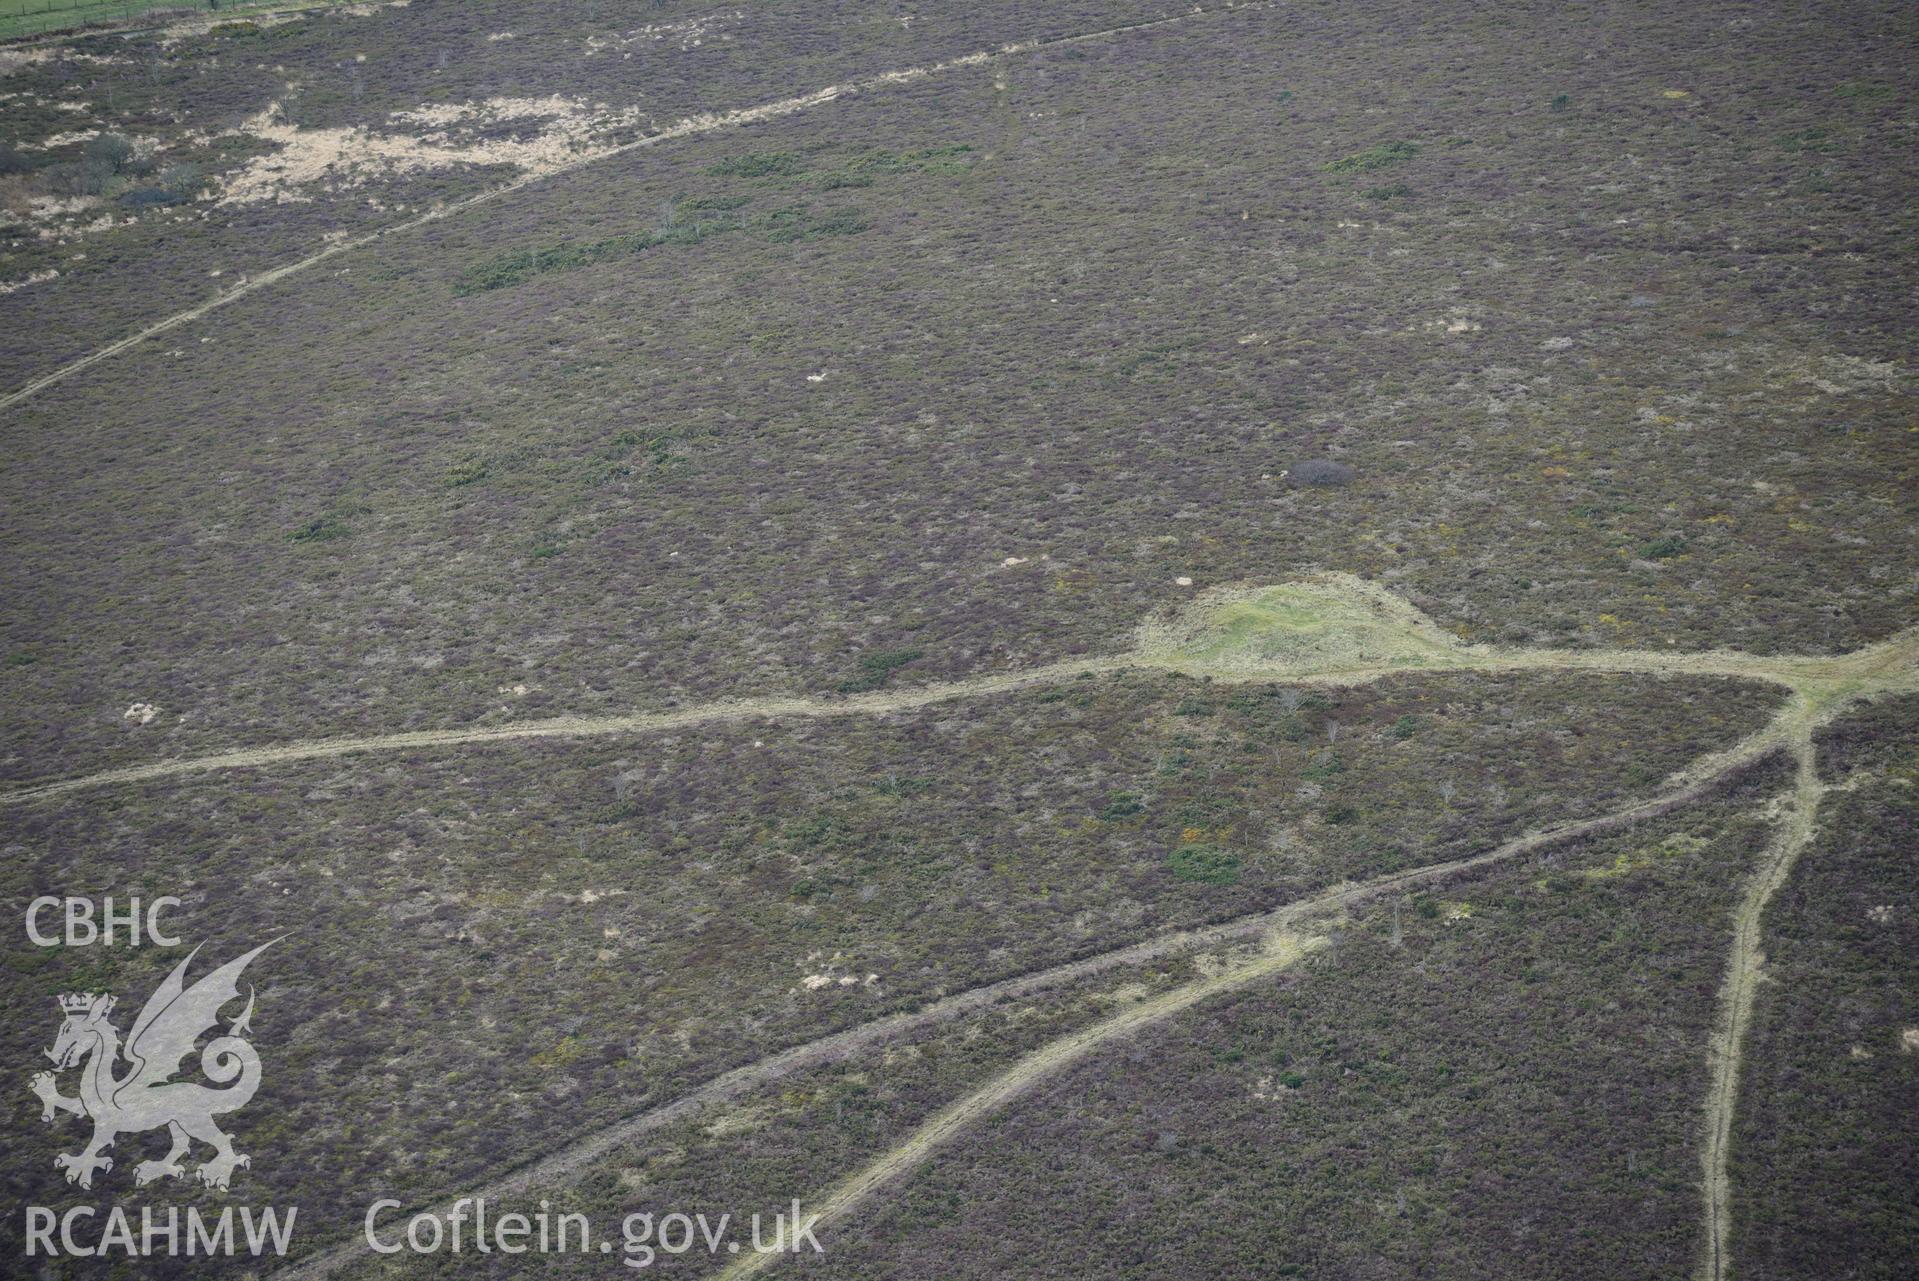 Freni-Fach Barrow near Bwlch-y-Groes, Newcastle Emlyn. Oblique aerial photograph taken during the Royal Commission's programme of archaeological aerial reconnaissance by Toby Driver on 13th March 2015.